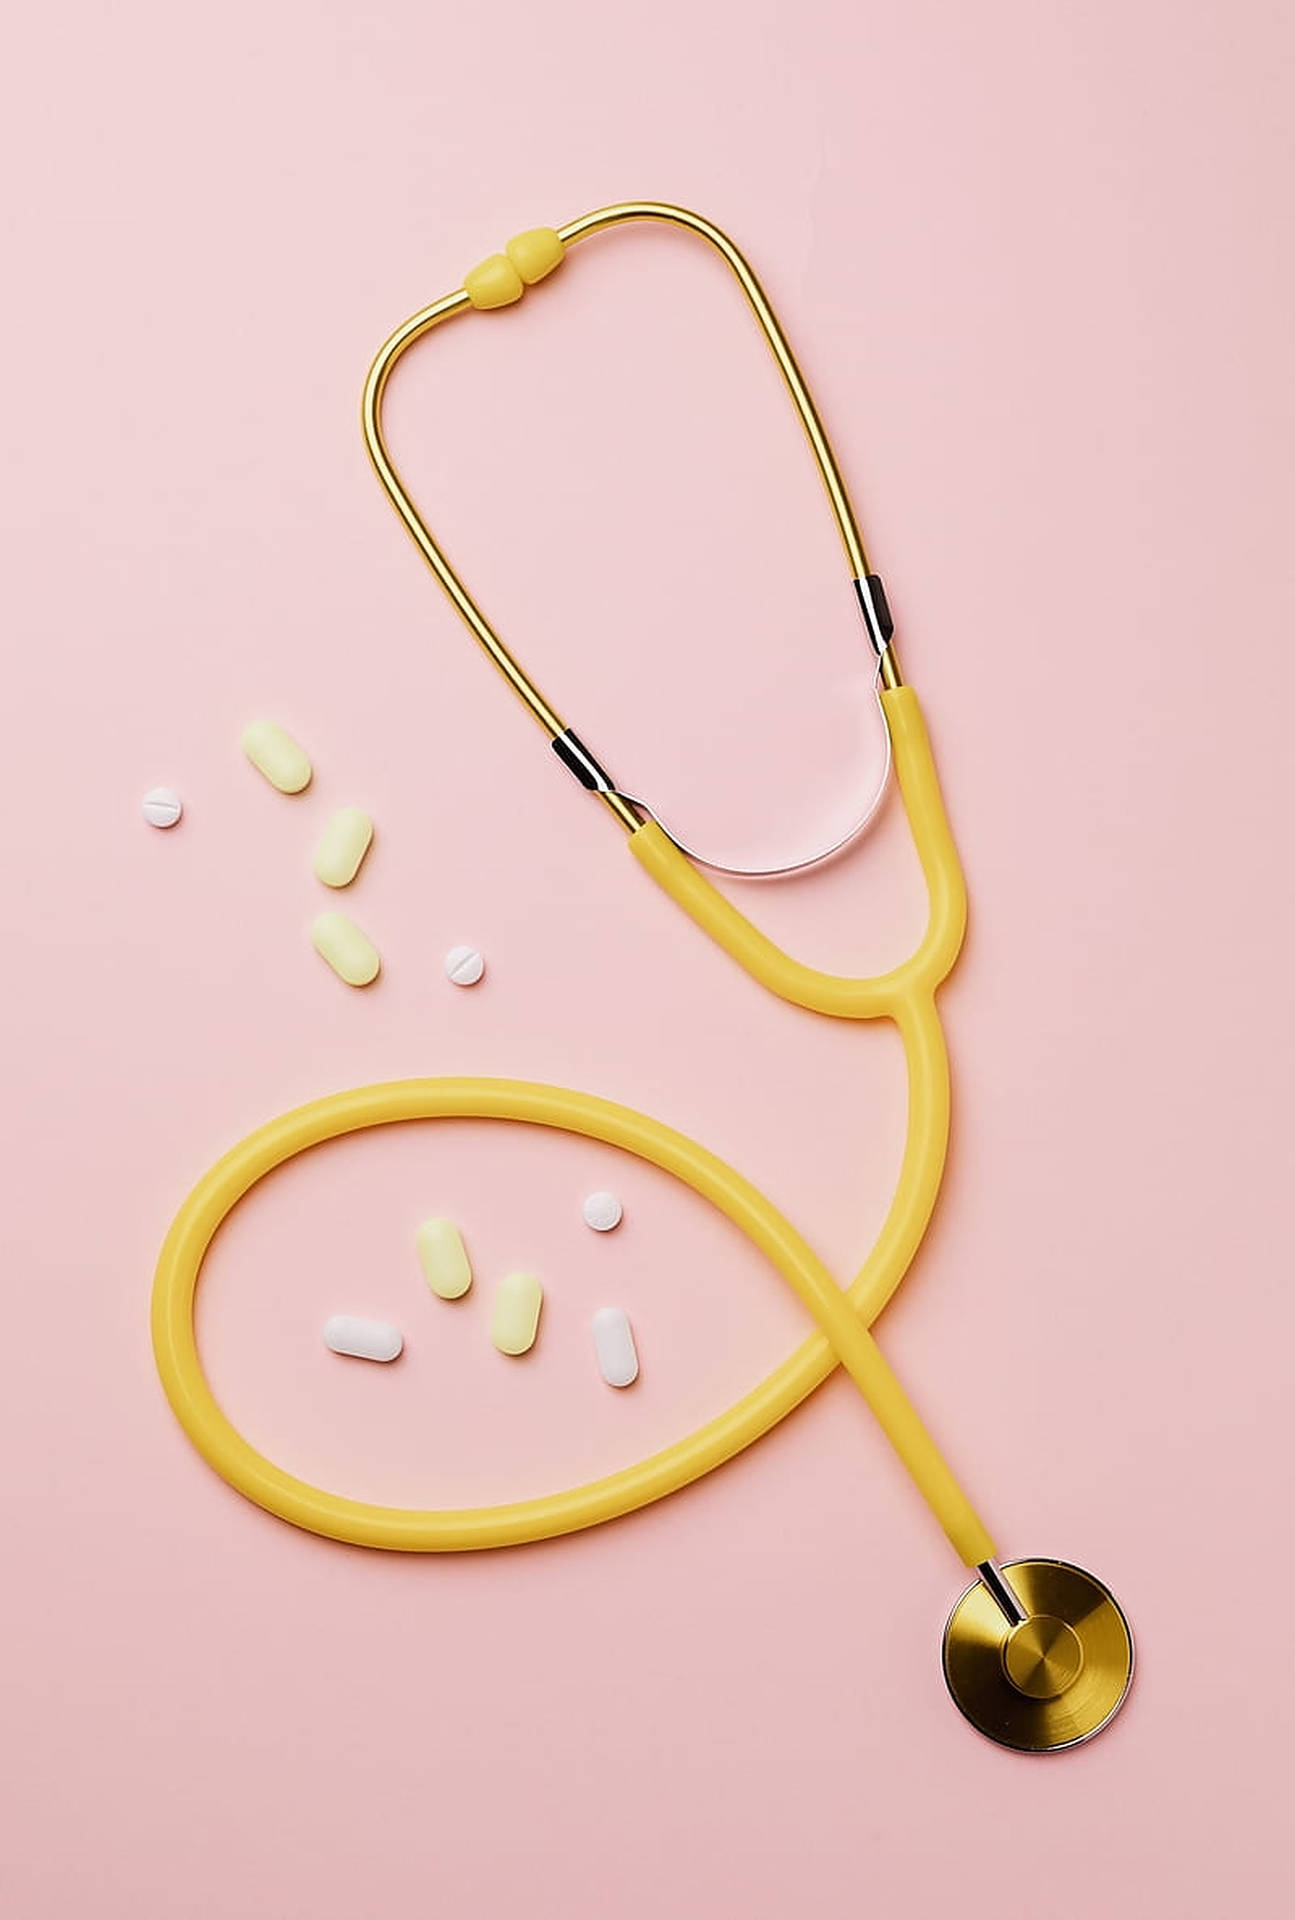 Experienced Doctor Wearing A Yellow Stethoscope